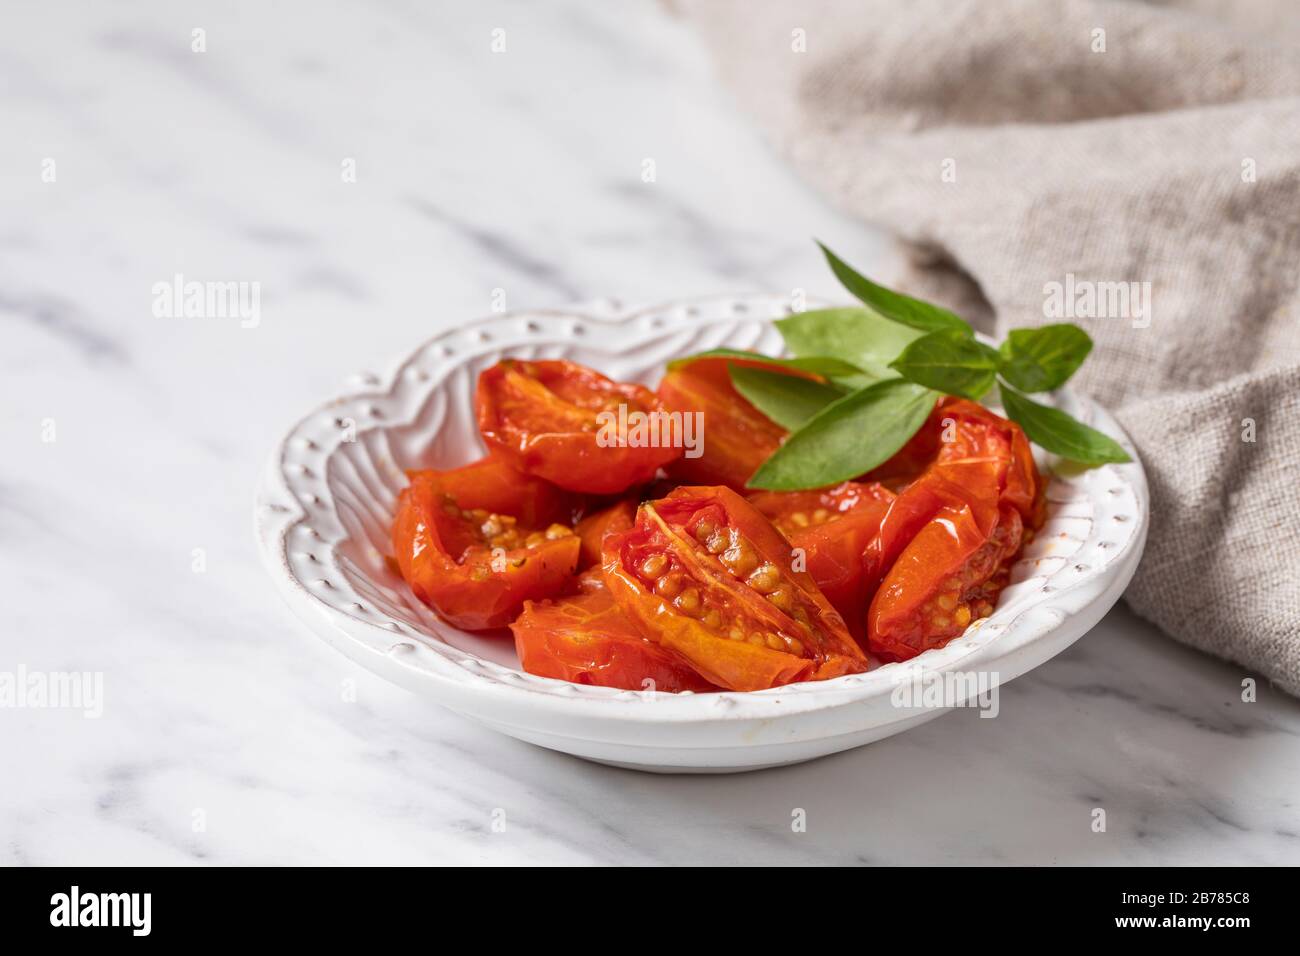 Sun dried tomatoes on a white plate, with a sprig of fresh basil as garment. The plate is on a white marble background, with a linen napkin on the sid Stock Photo